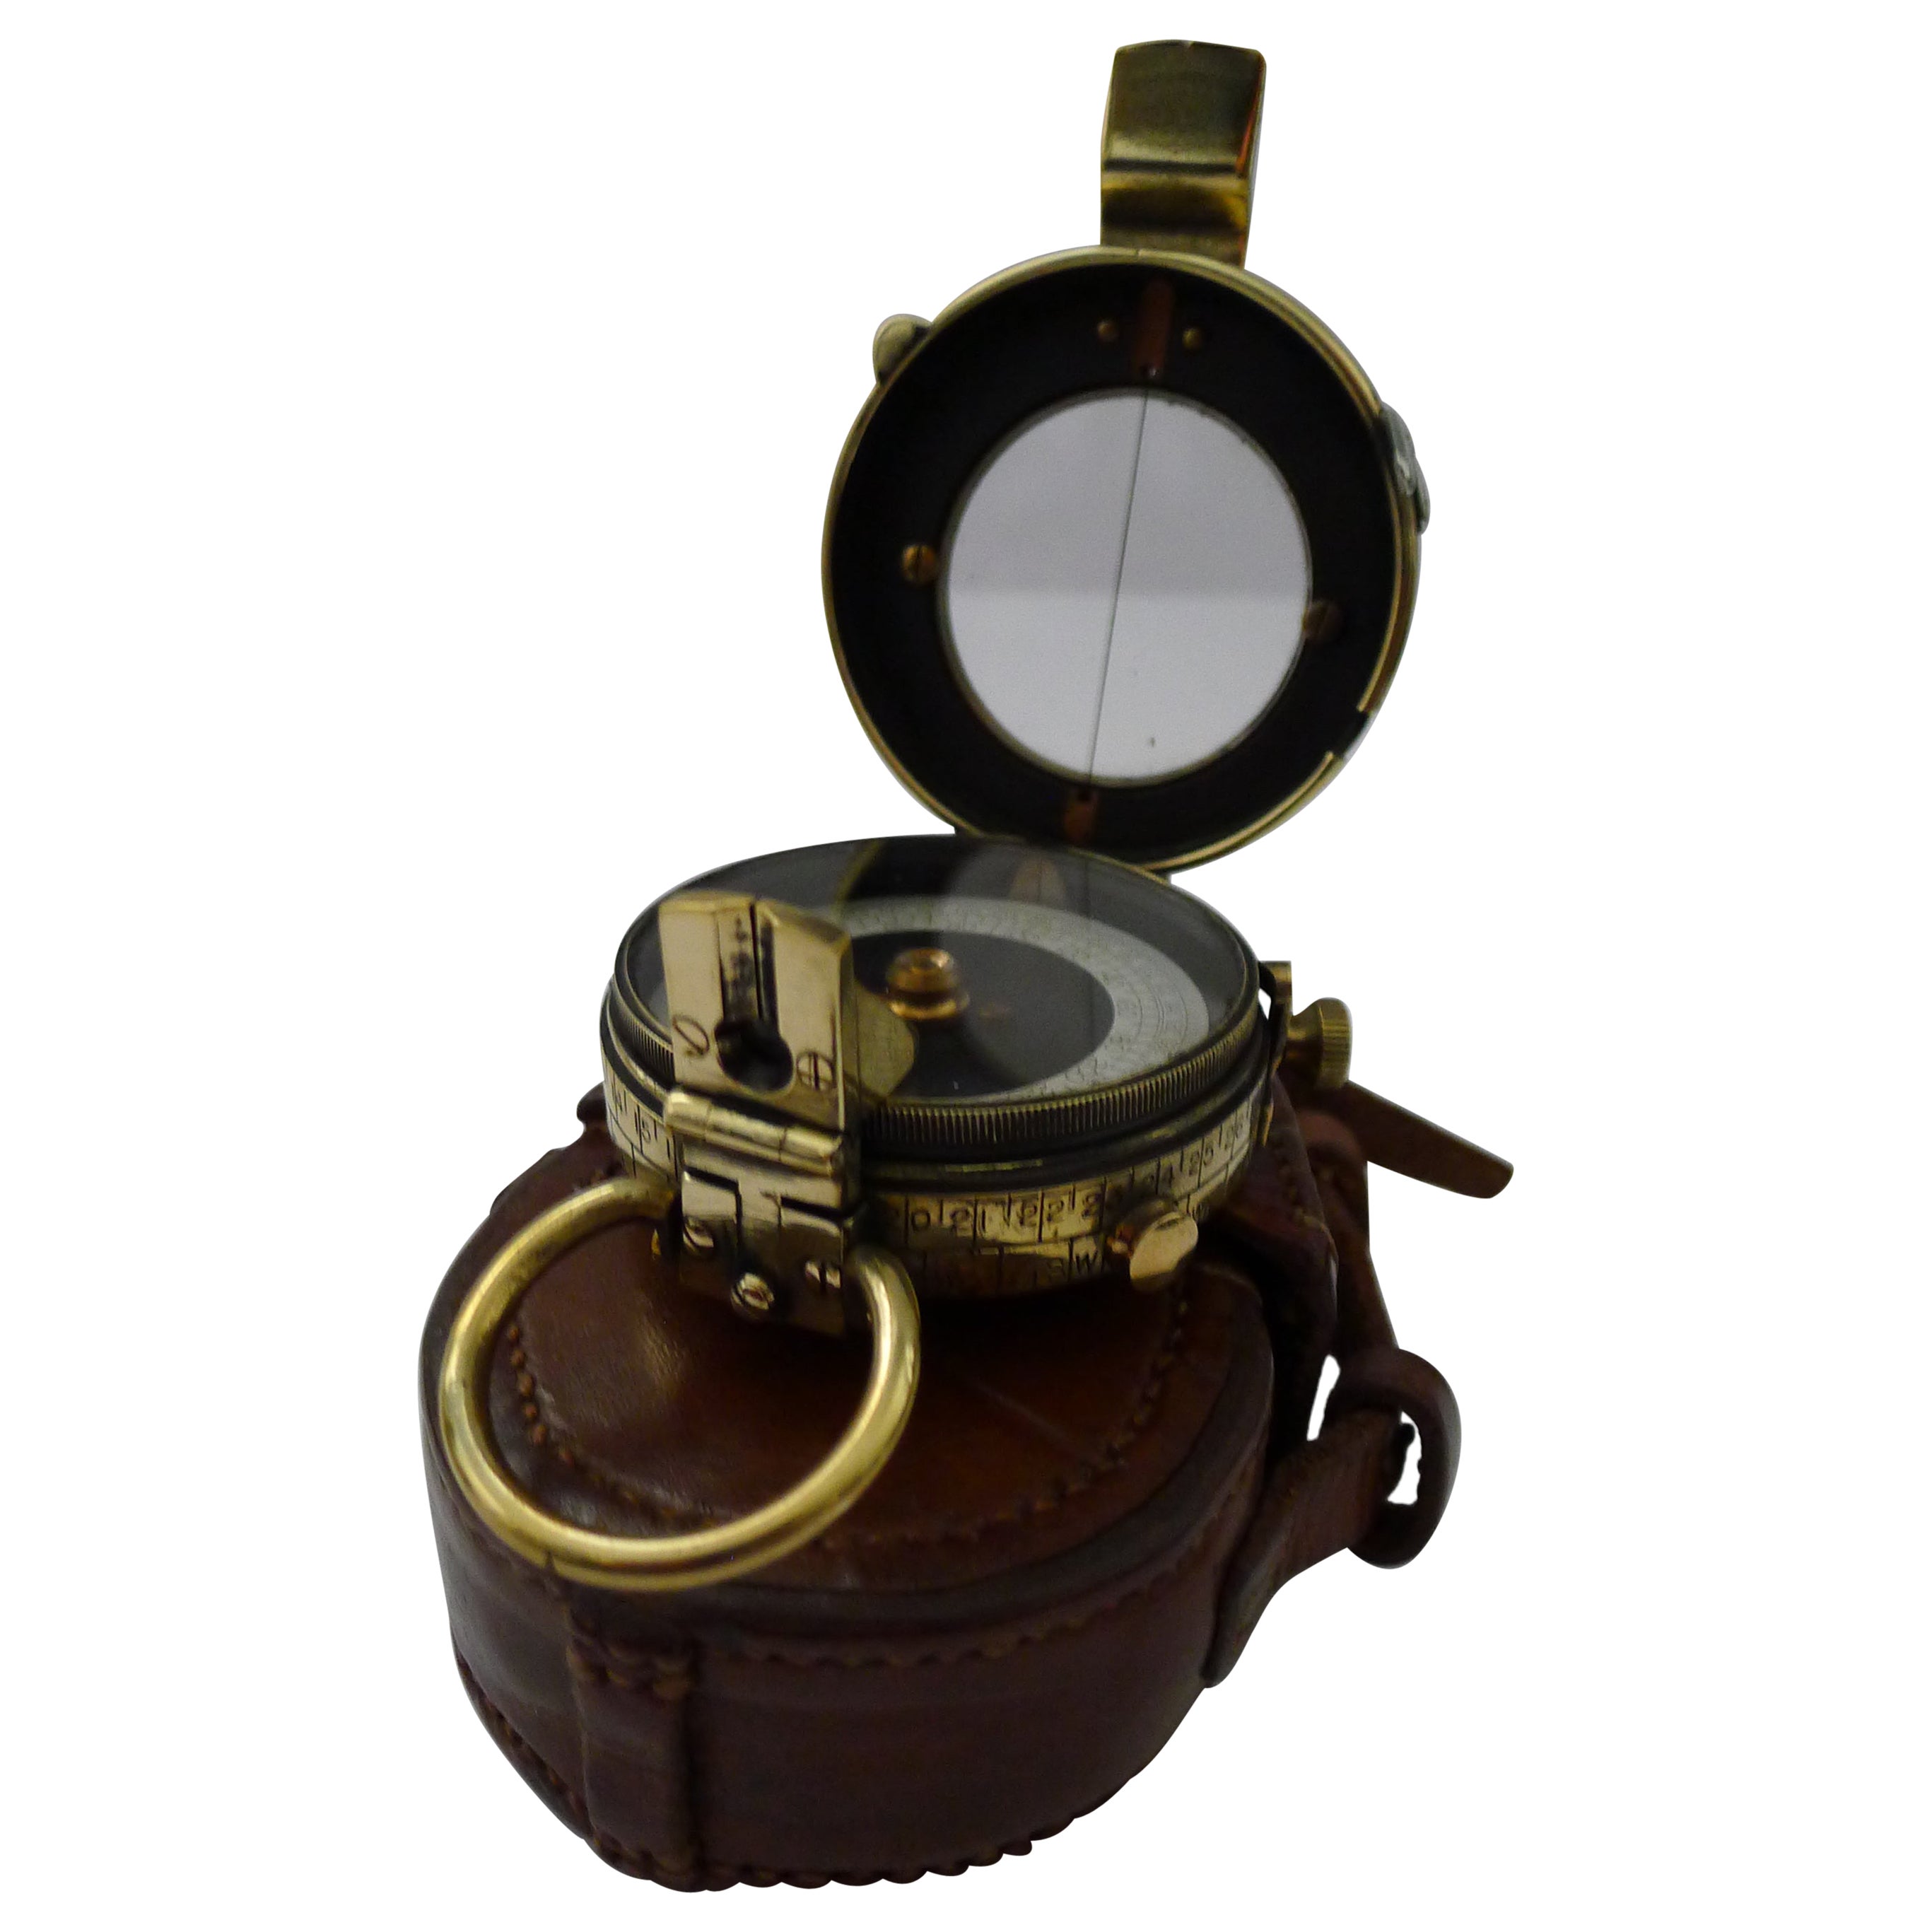 WW1 1918 British Army Officer's Compass - Verner's Patent MK VII by French Ltd. For Sale